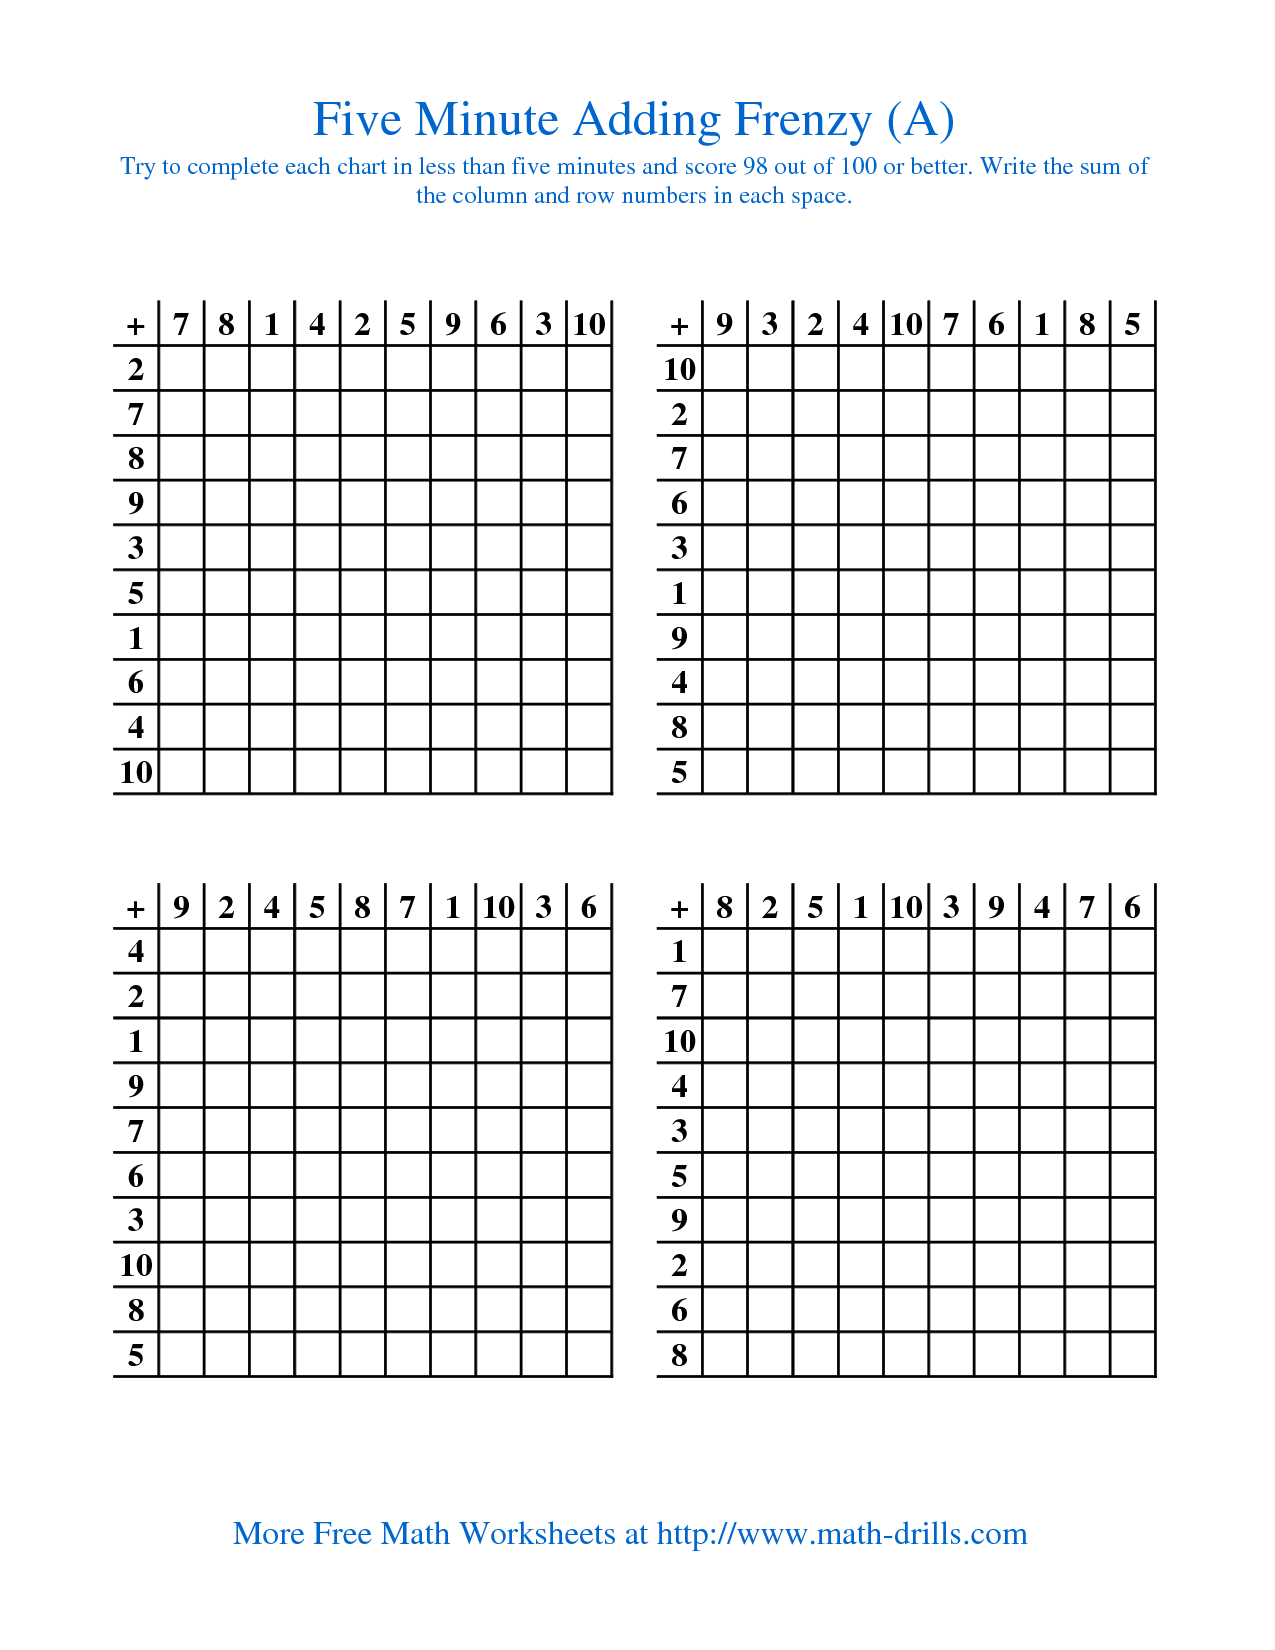 11-best-images-of-worksheets-addition-space-5-minute-math-frenzy-multiplication-outer-space